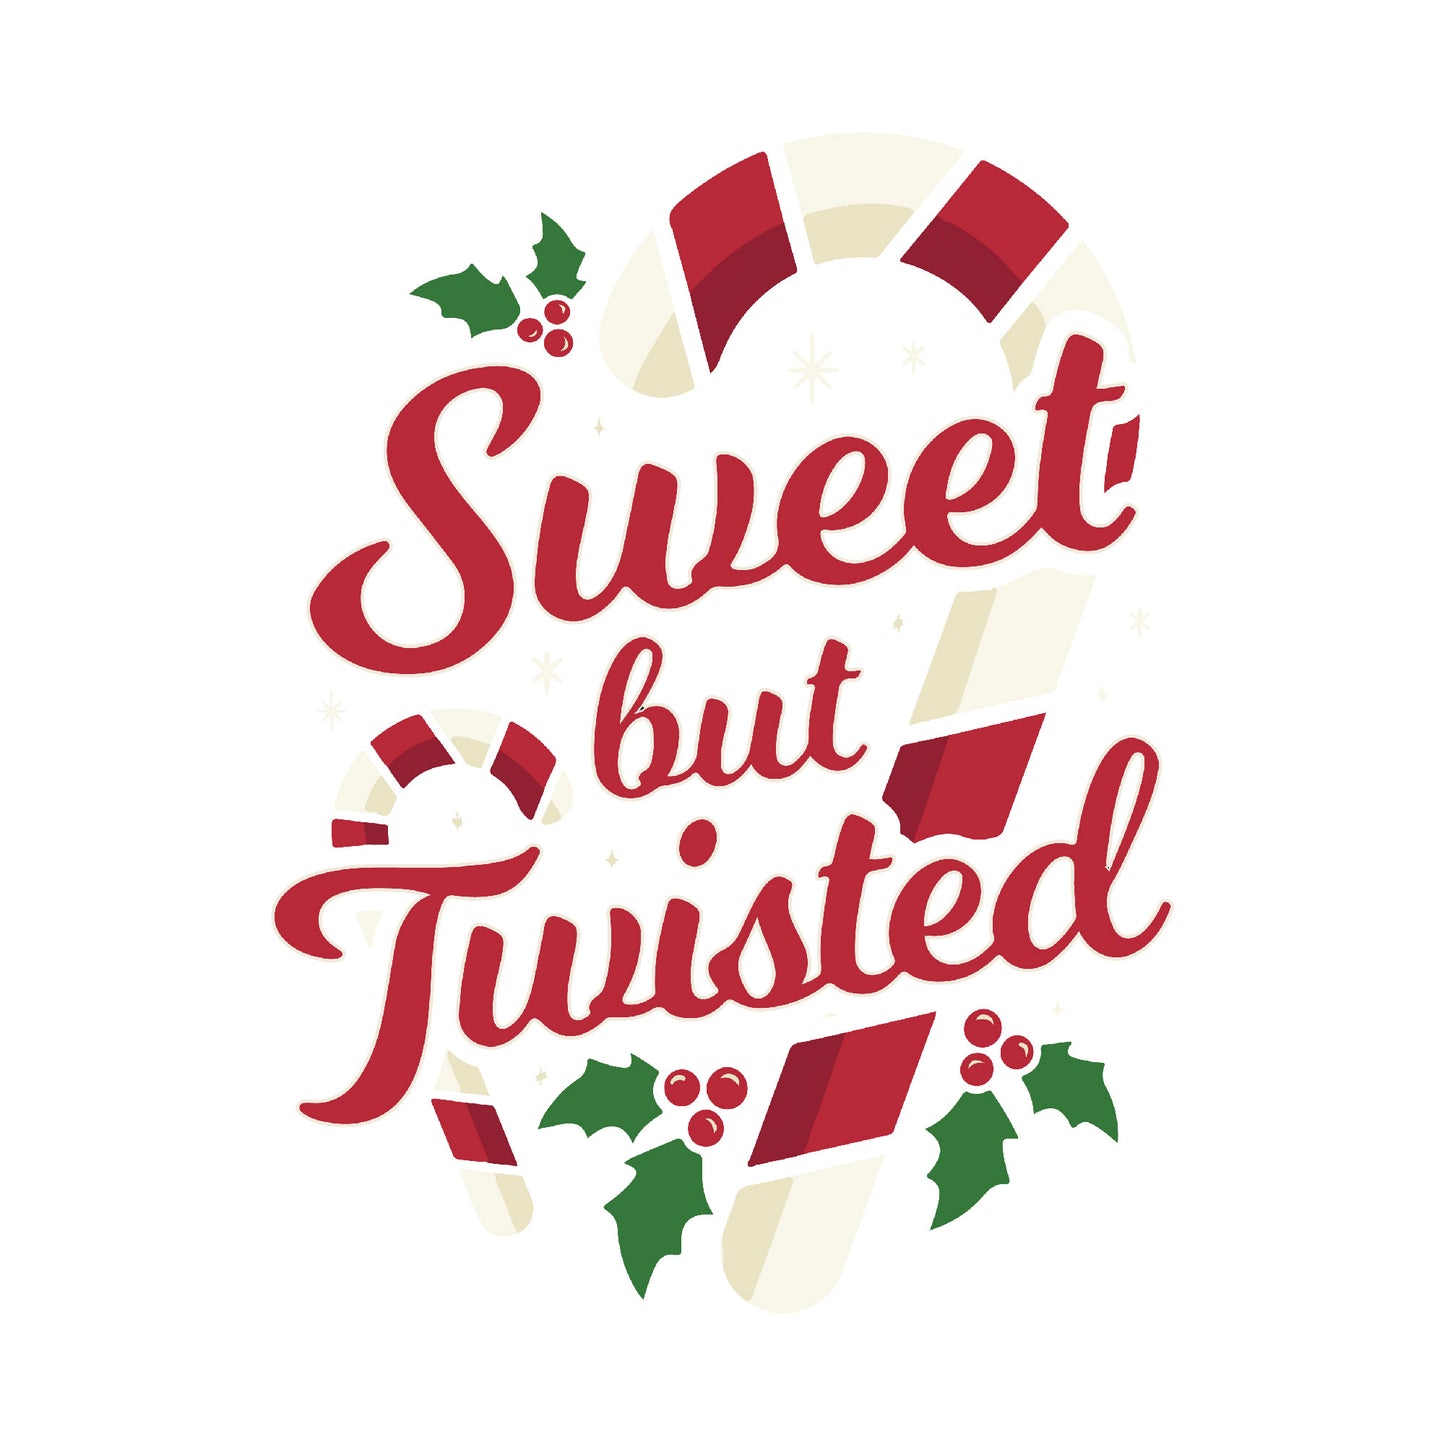 Sugar & Spiral: 'Sweet but Twisted' Festive Candy Cane Tee